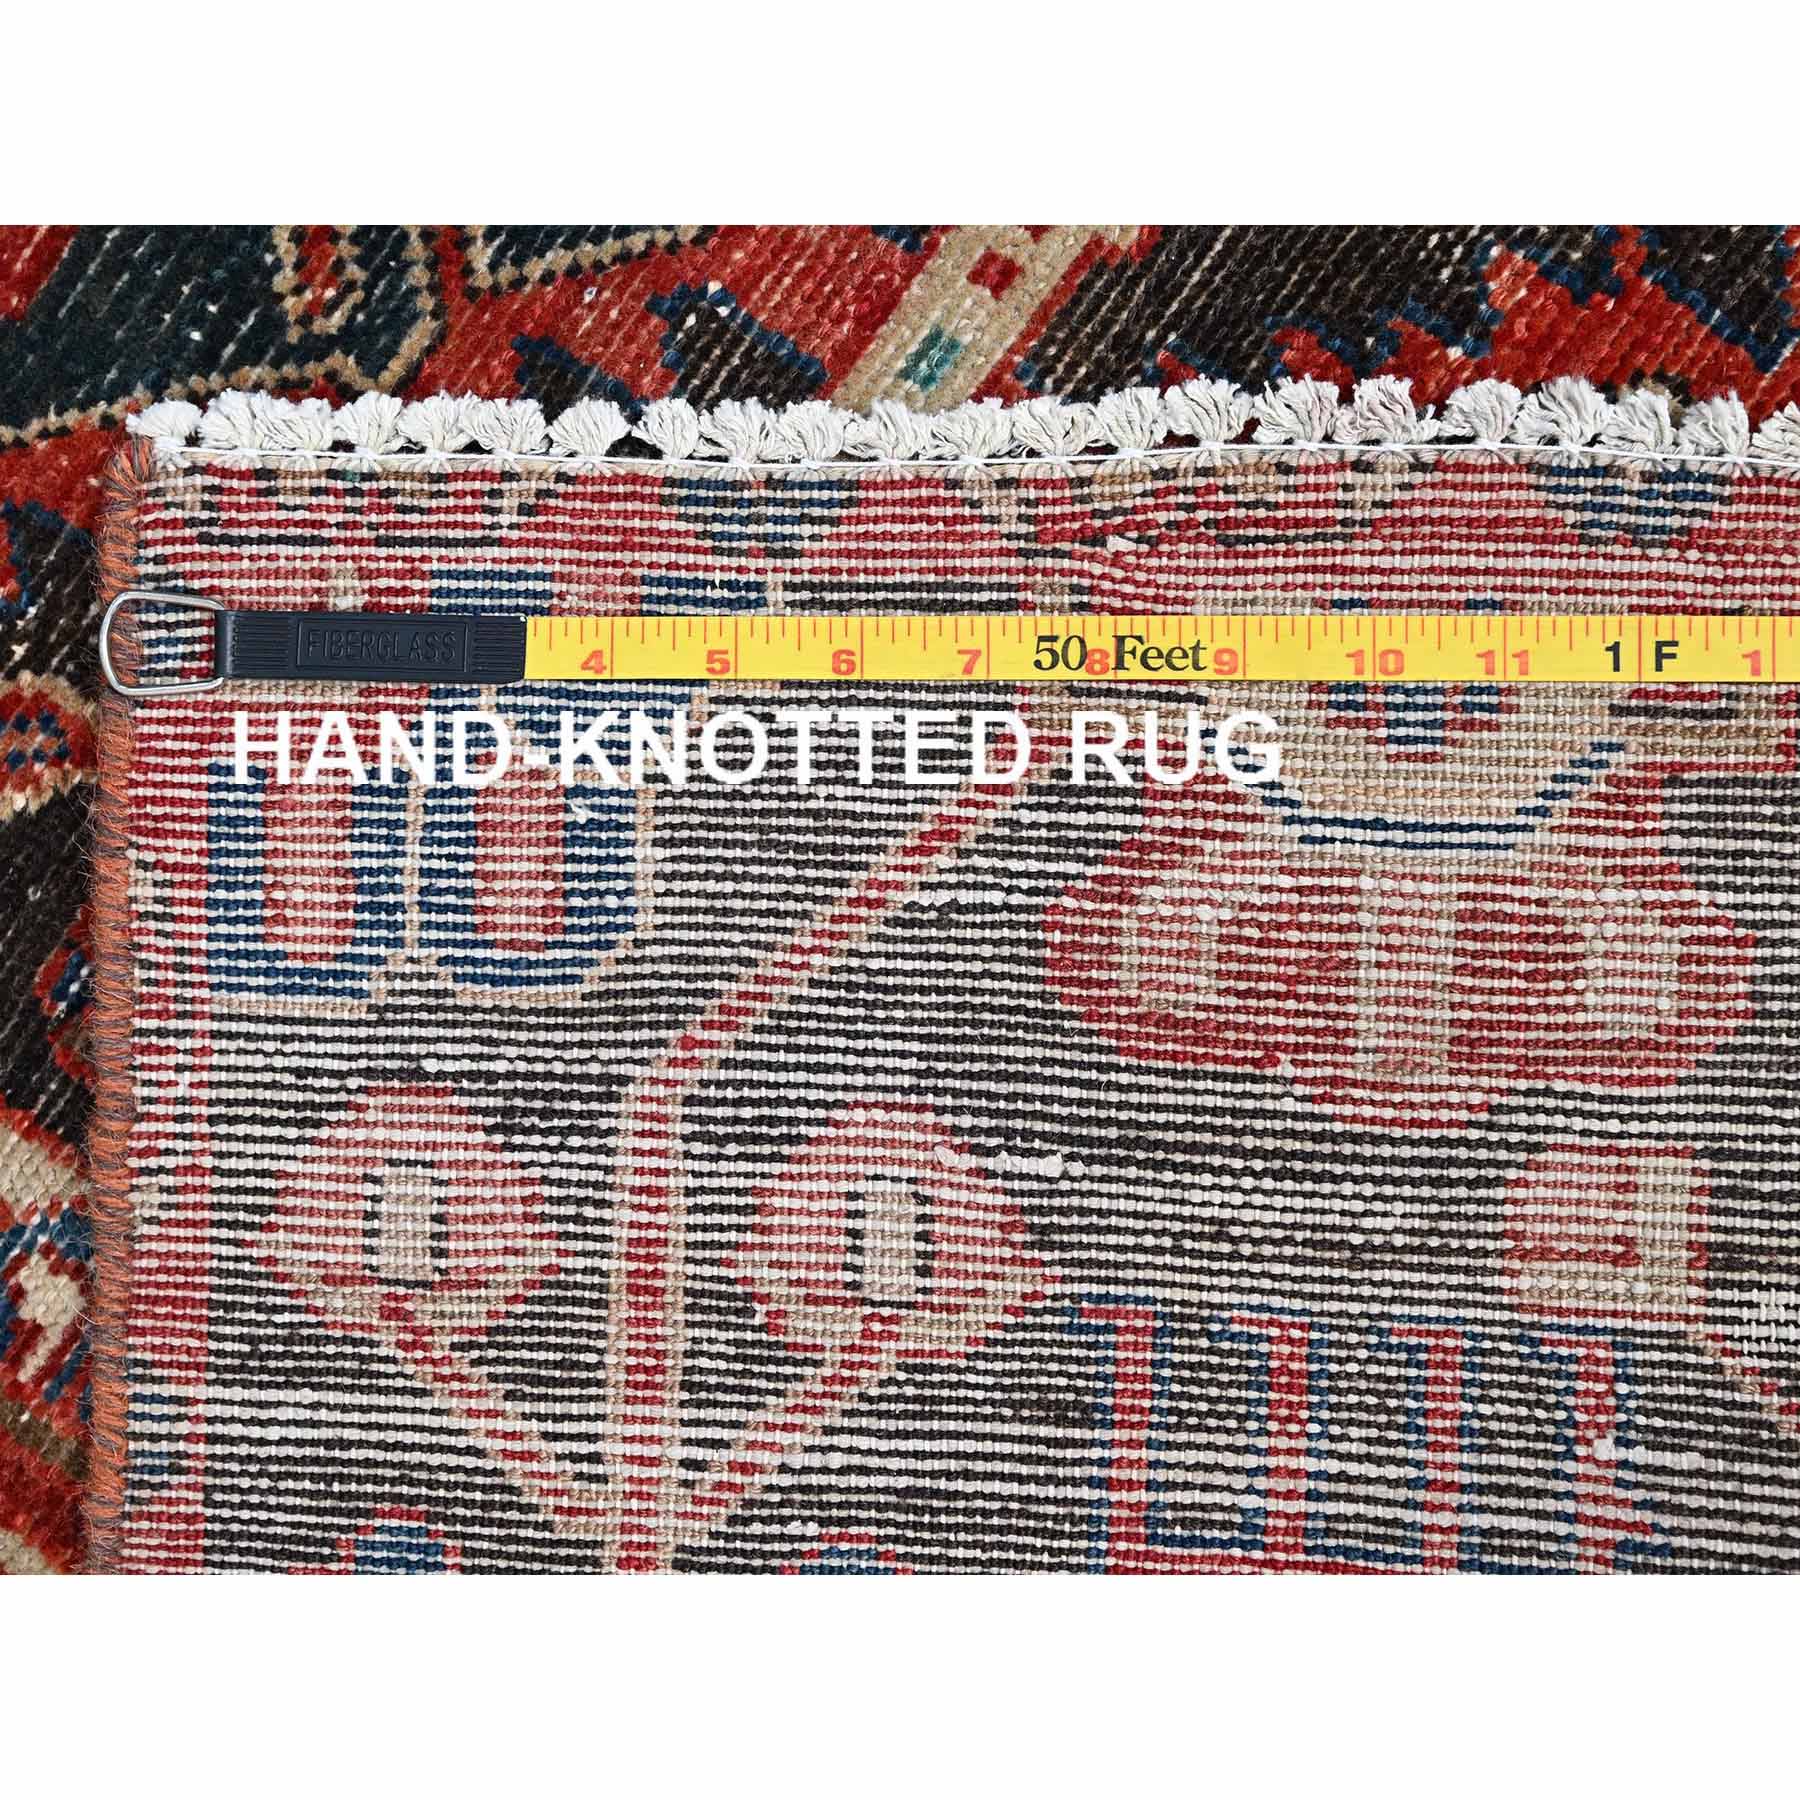 Overdyed-Vintage-Hand-Knotted-Rug-430005